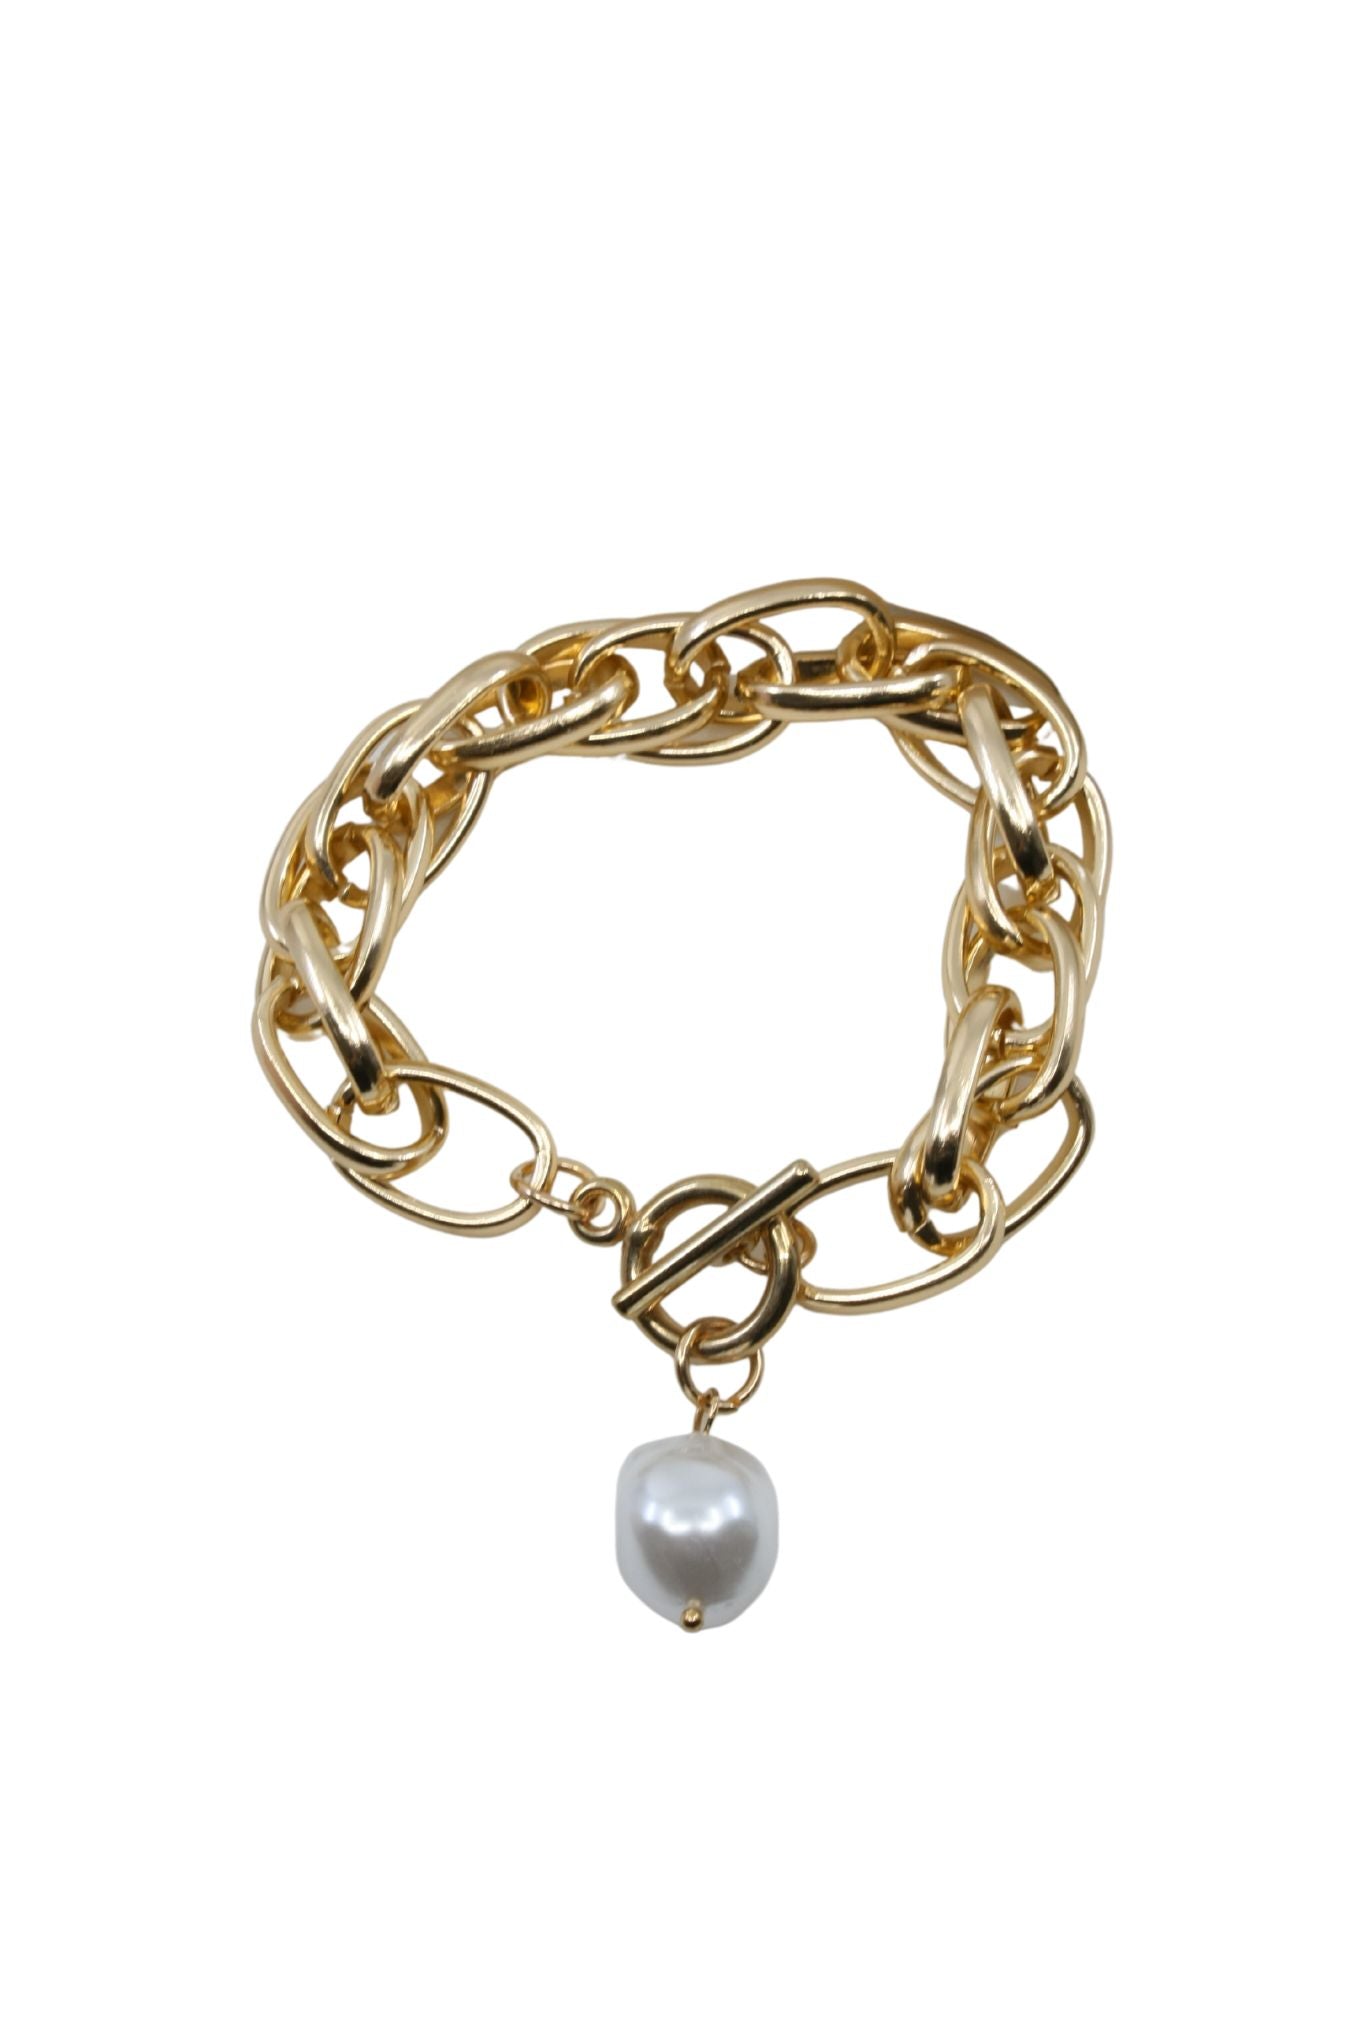 Gold Lariat Bracelet with Pearl Pendant